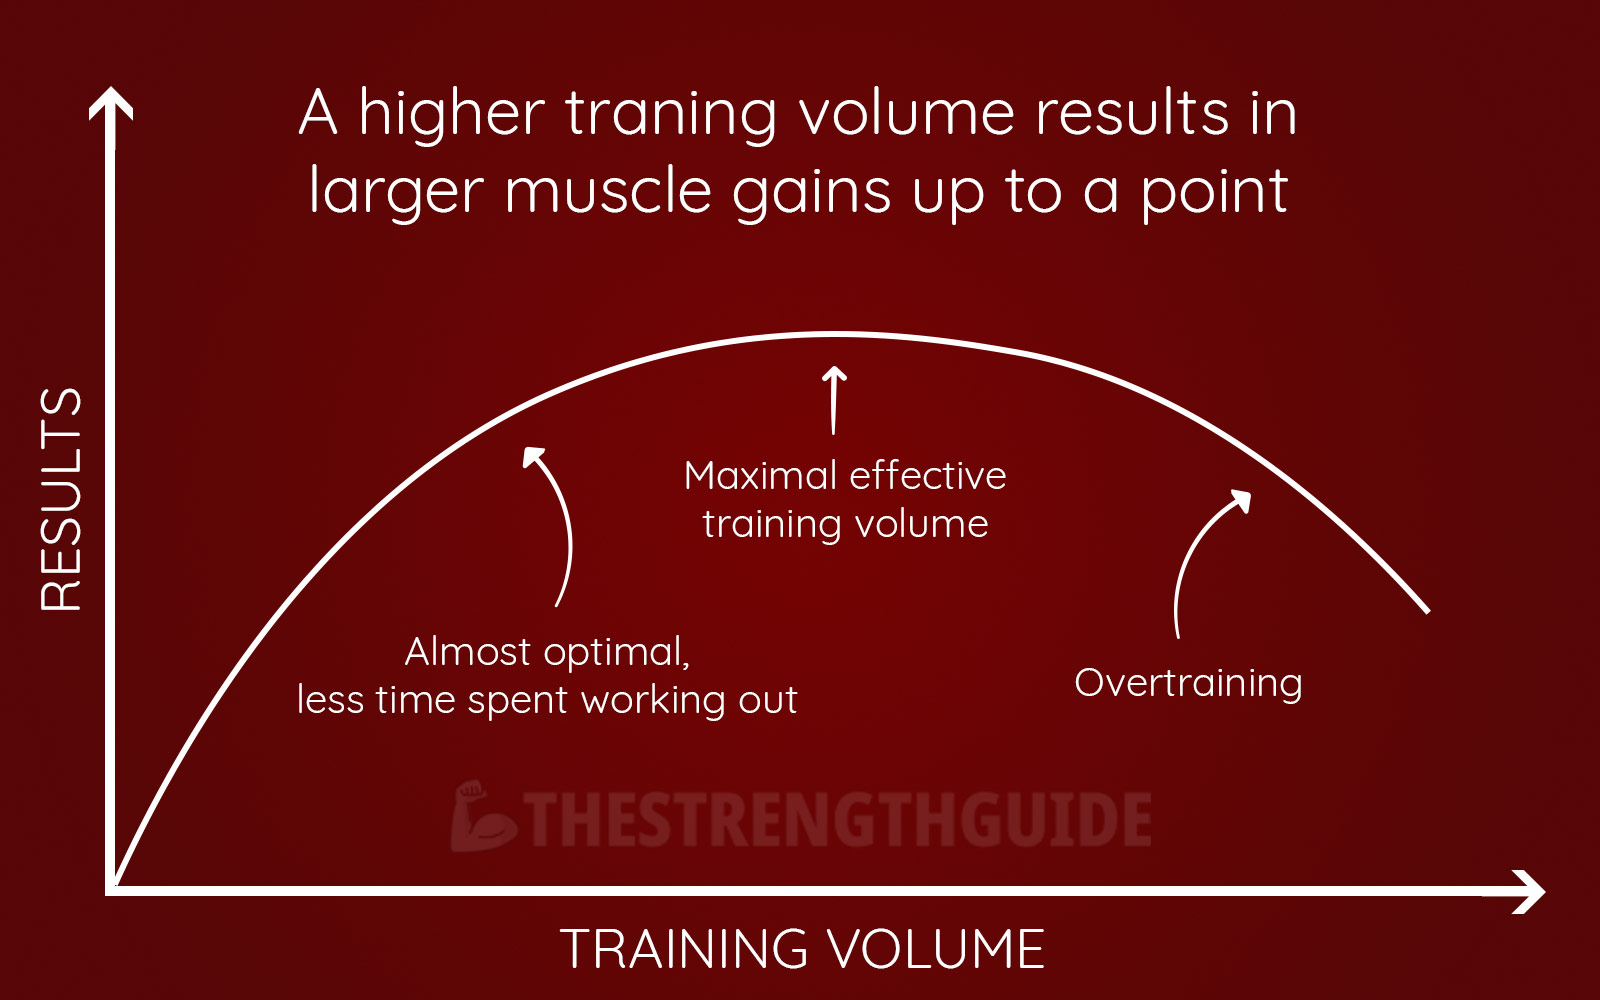 Graph showing the relationship between training volume and results as an inverted U-curve